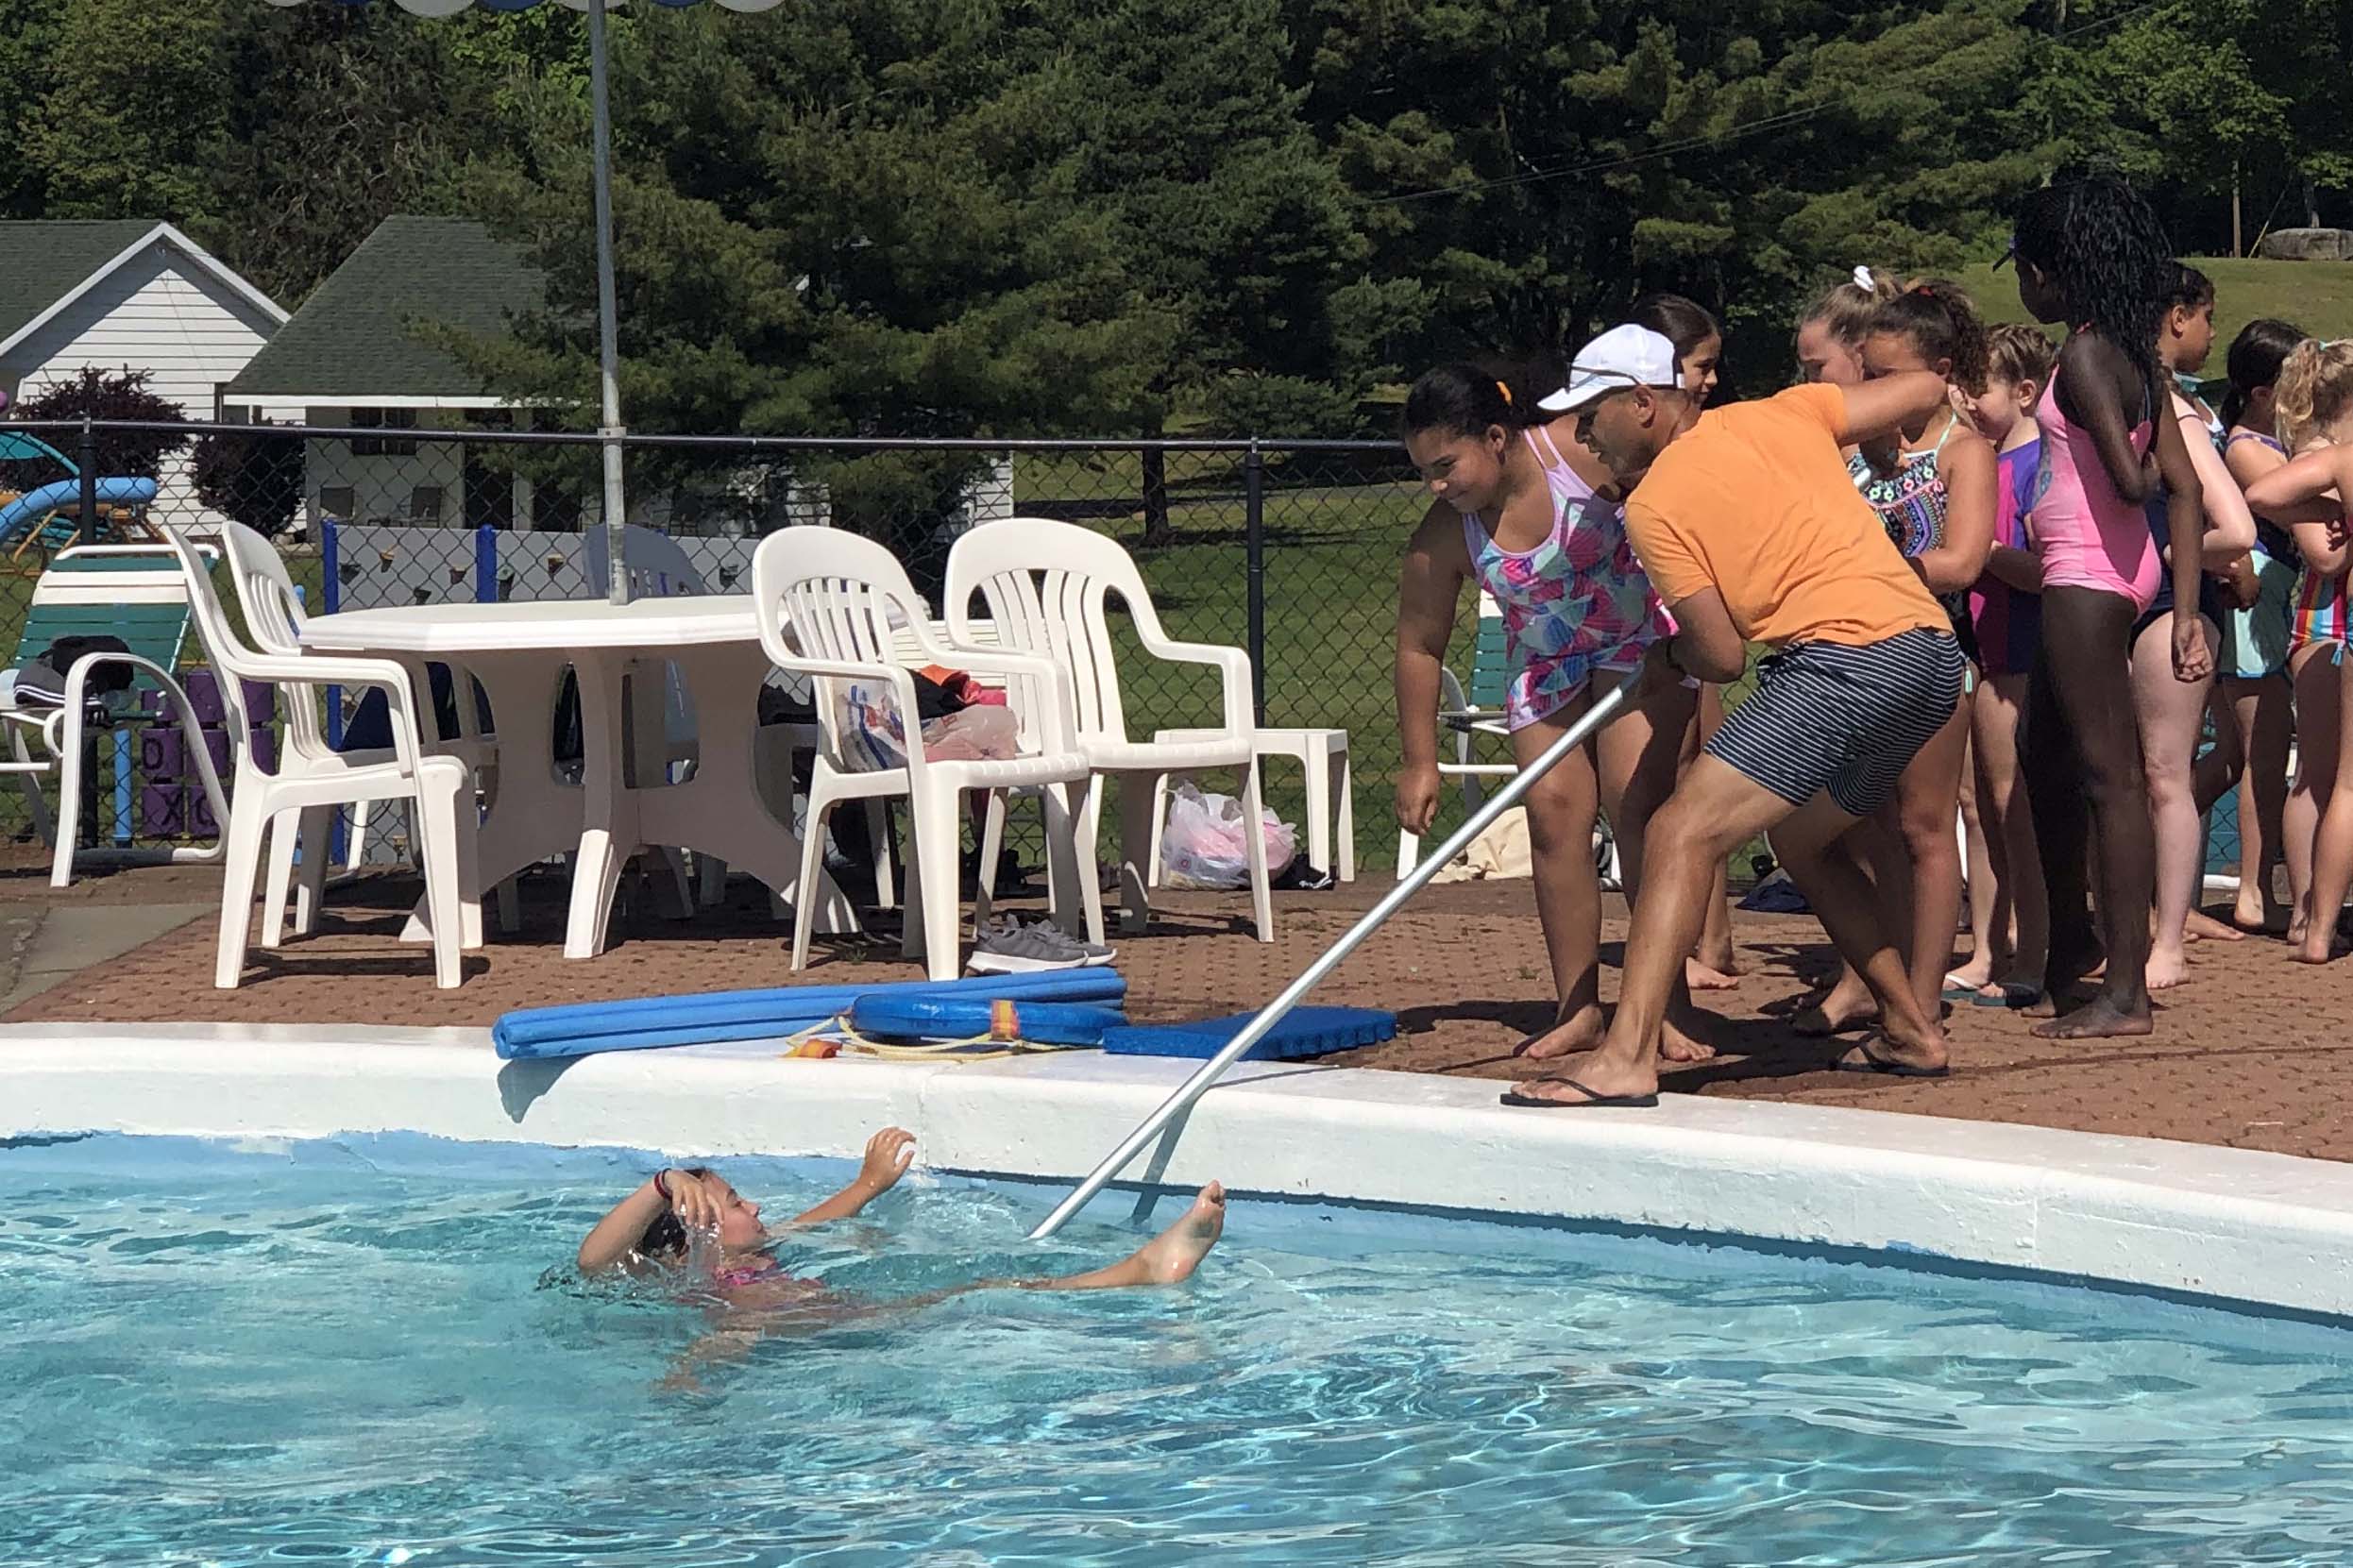 PE Teacher dempstrated how to rescue someone from a pool